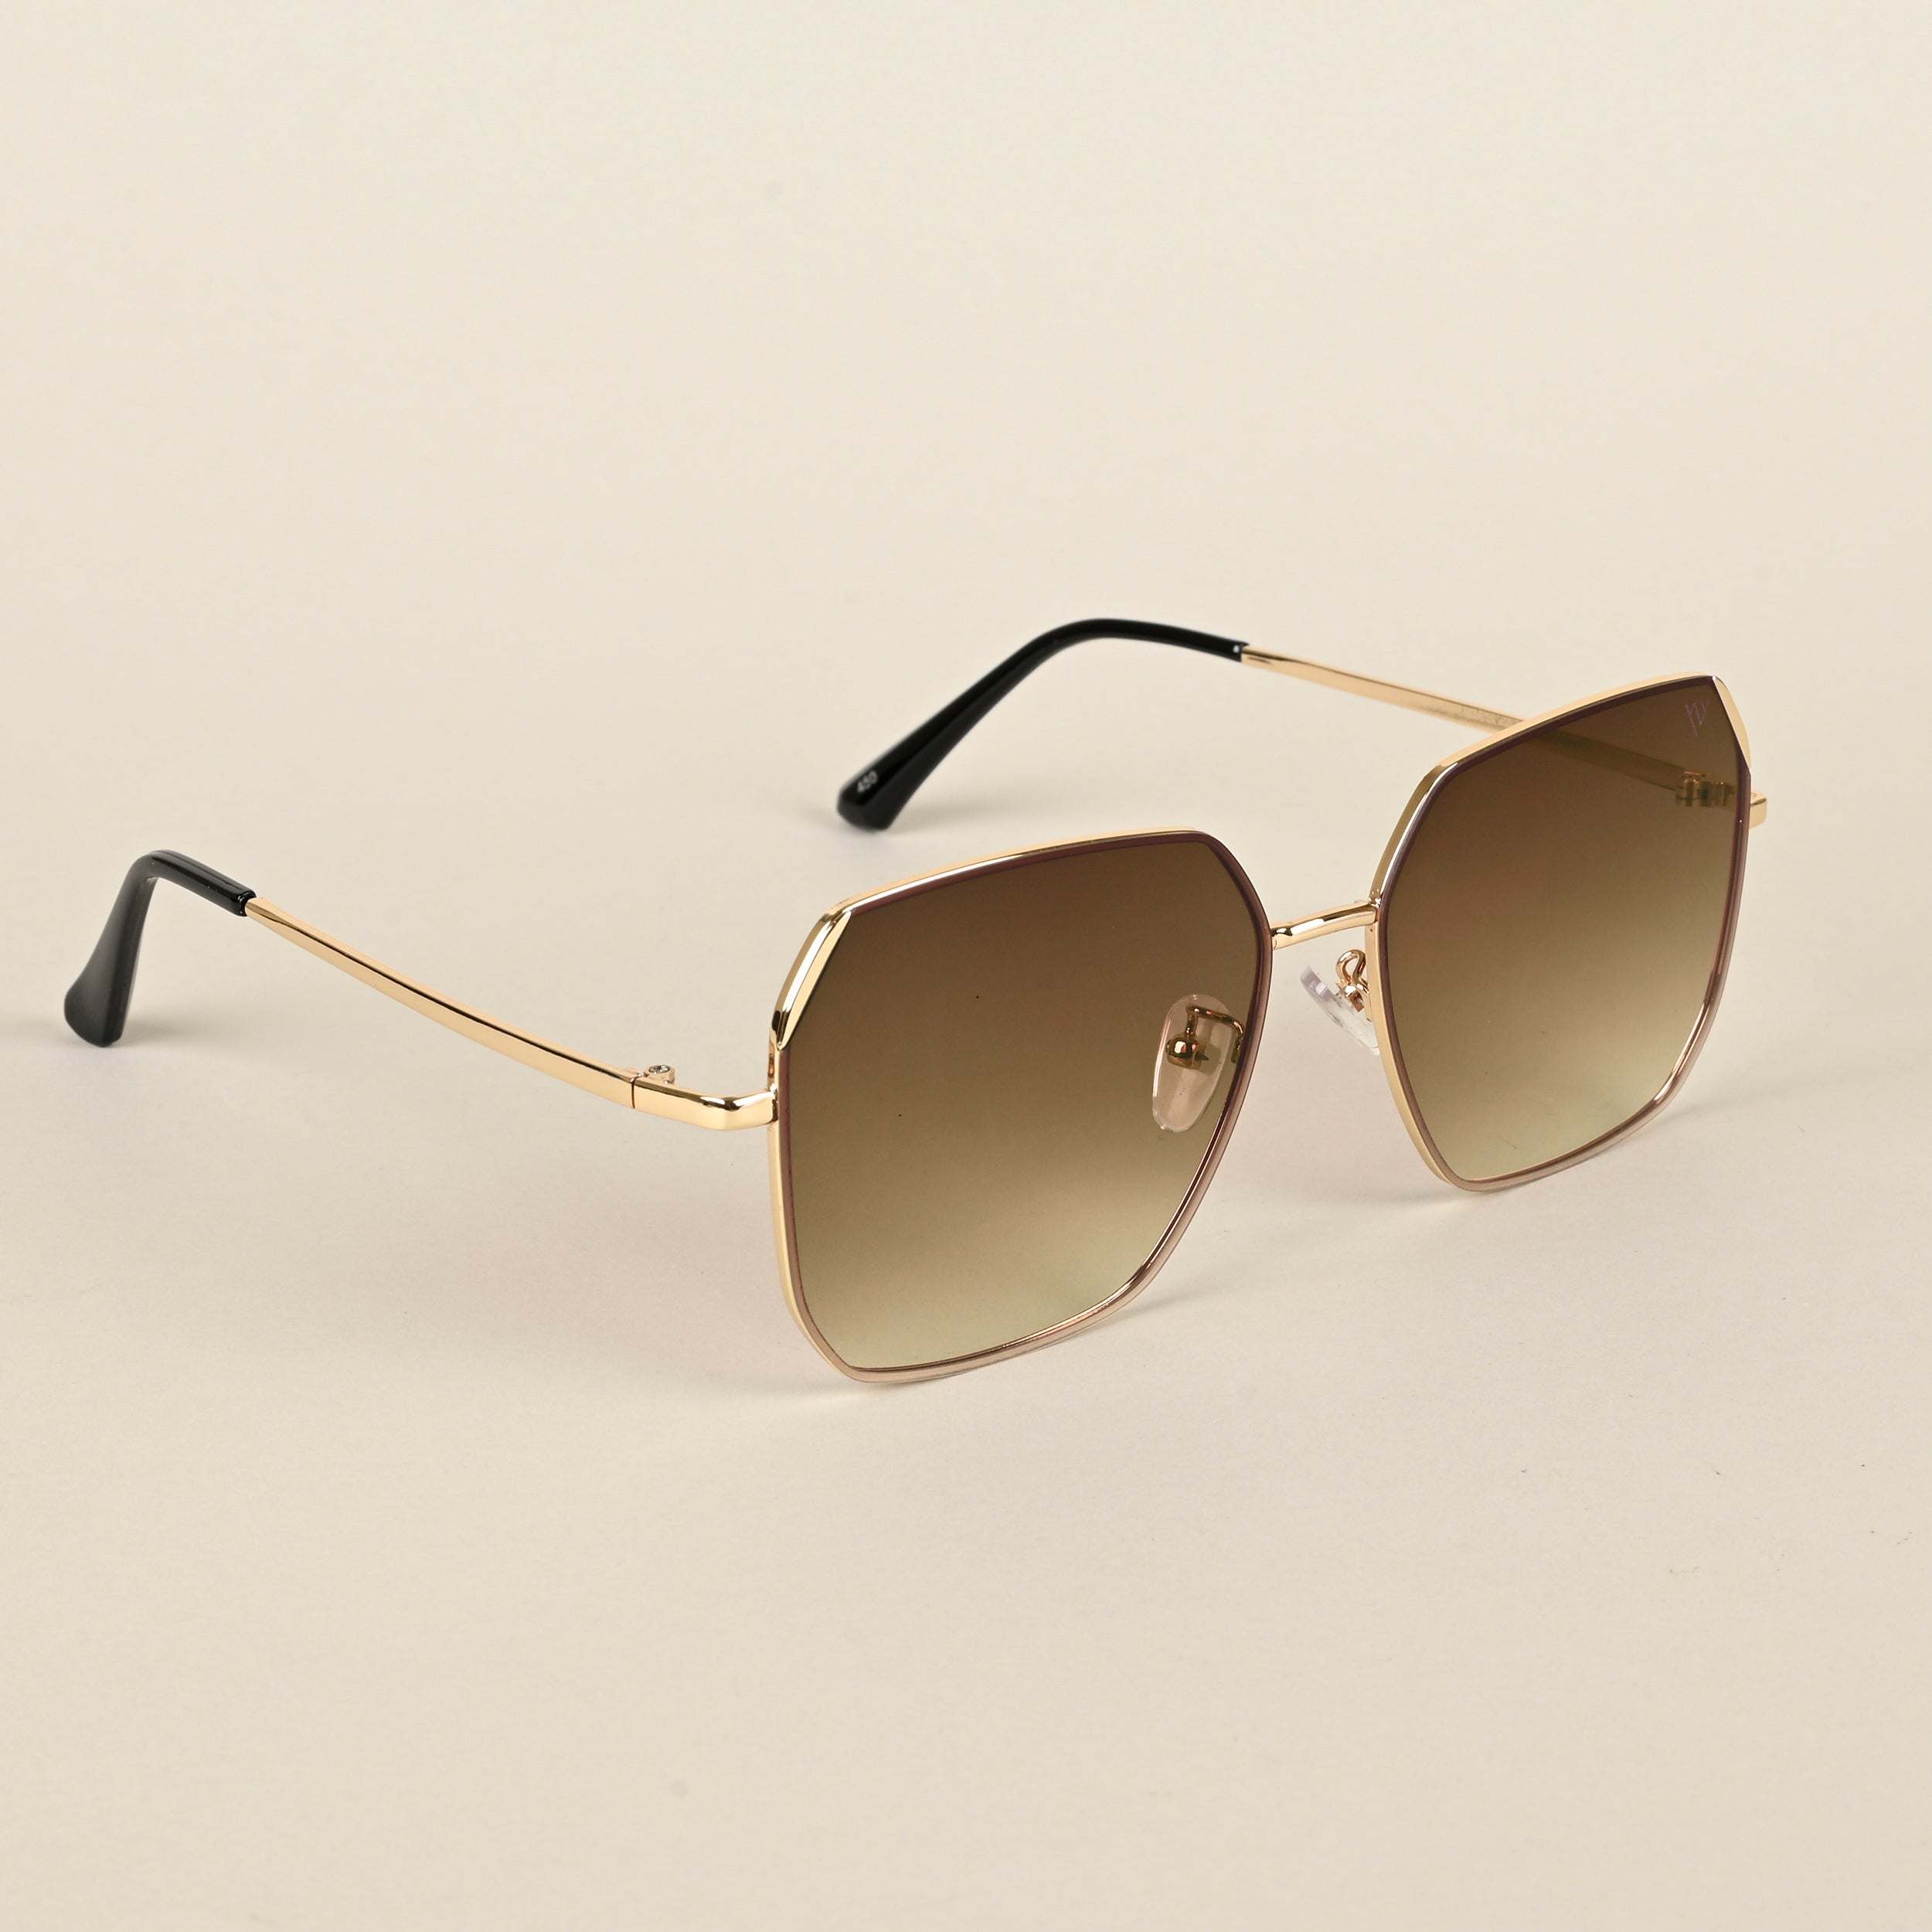 Voyage Brown Square Sunglasses for Men & Women - MG4338